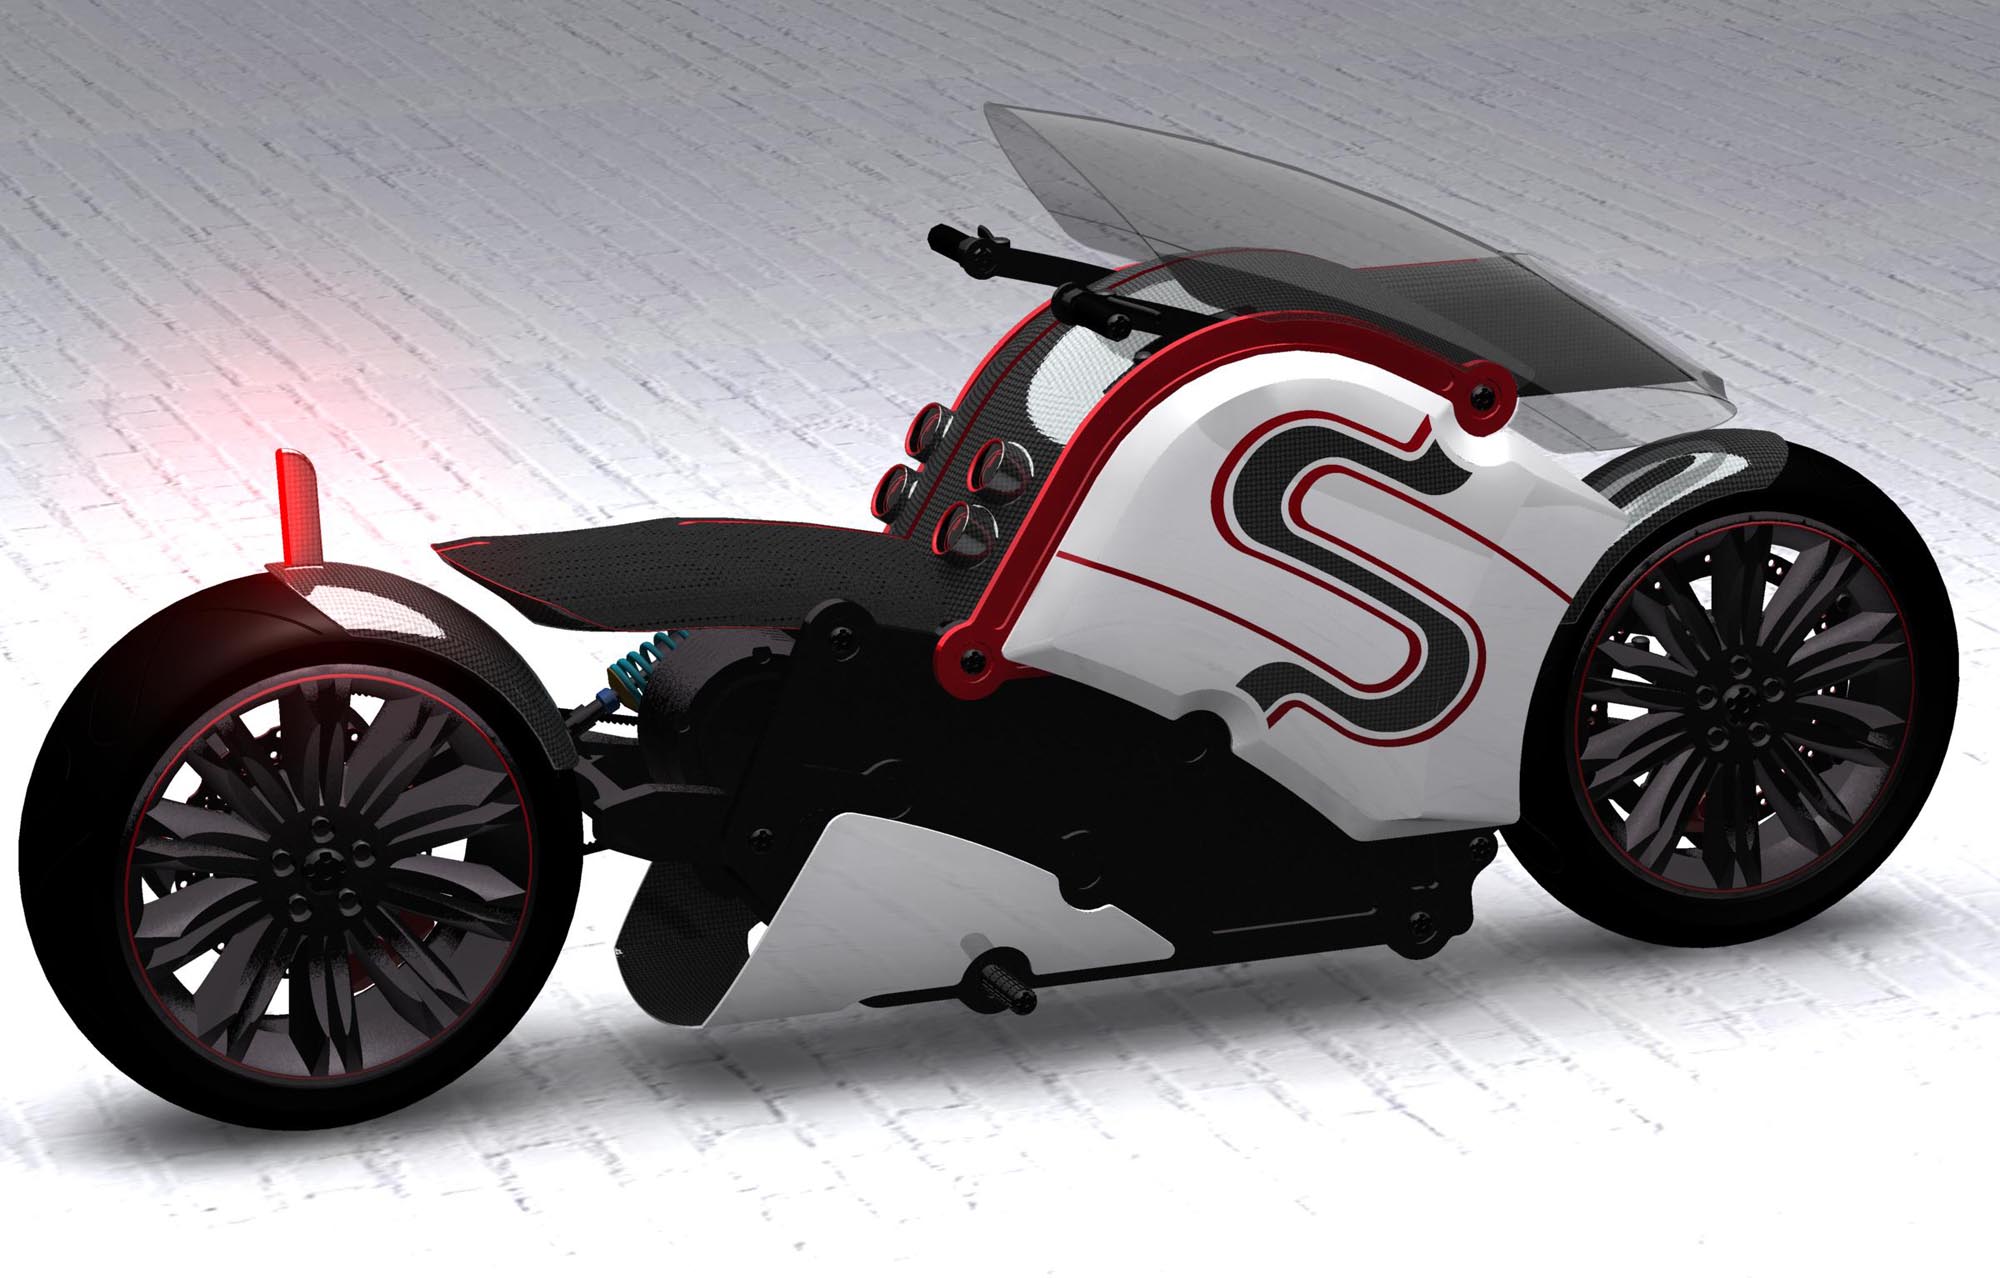 zecoo electric scooter design wallpaper new - luweh.com